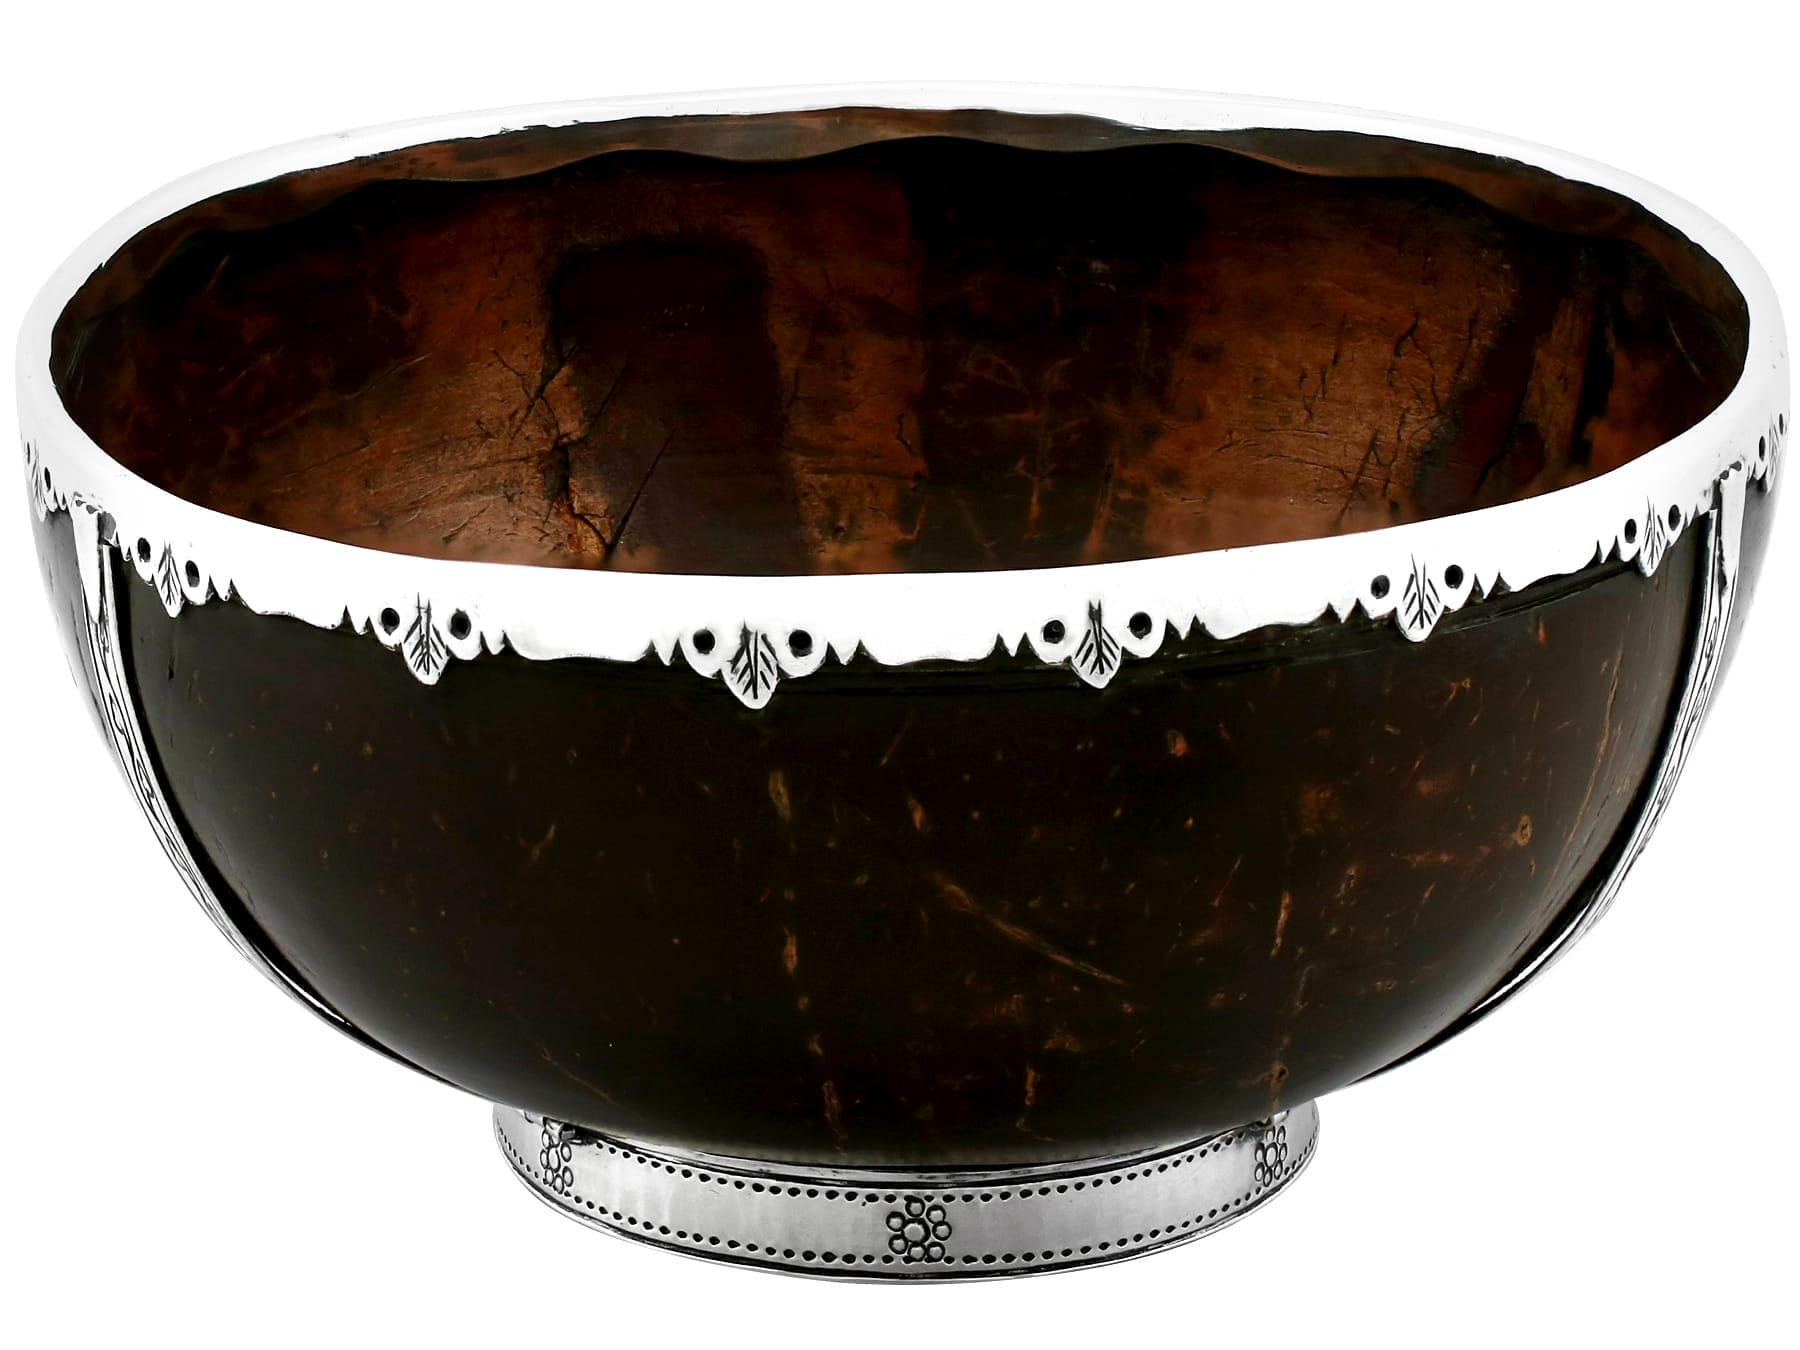 An exceptional, fine and impressive antique English sterling silver mounted coconut cup; an addition to our diverse silverware collection.

This exceptional antique George V sterling silver mounted coconut bowl has a circular rounded form onto a